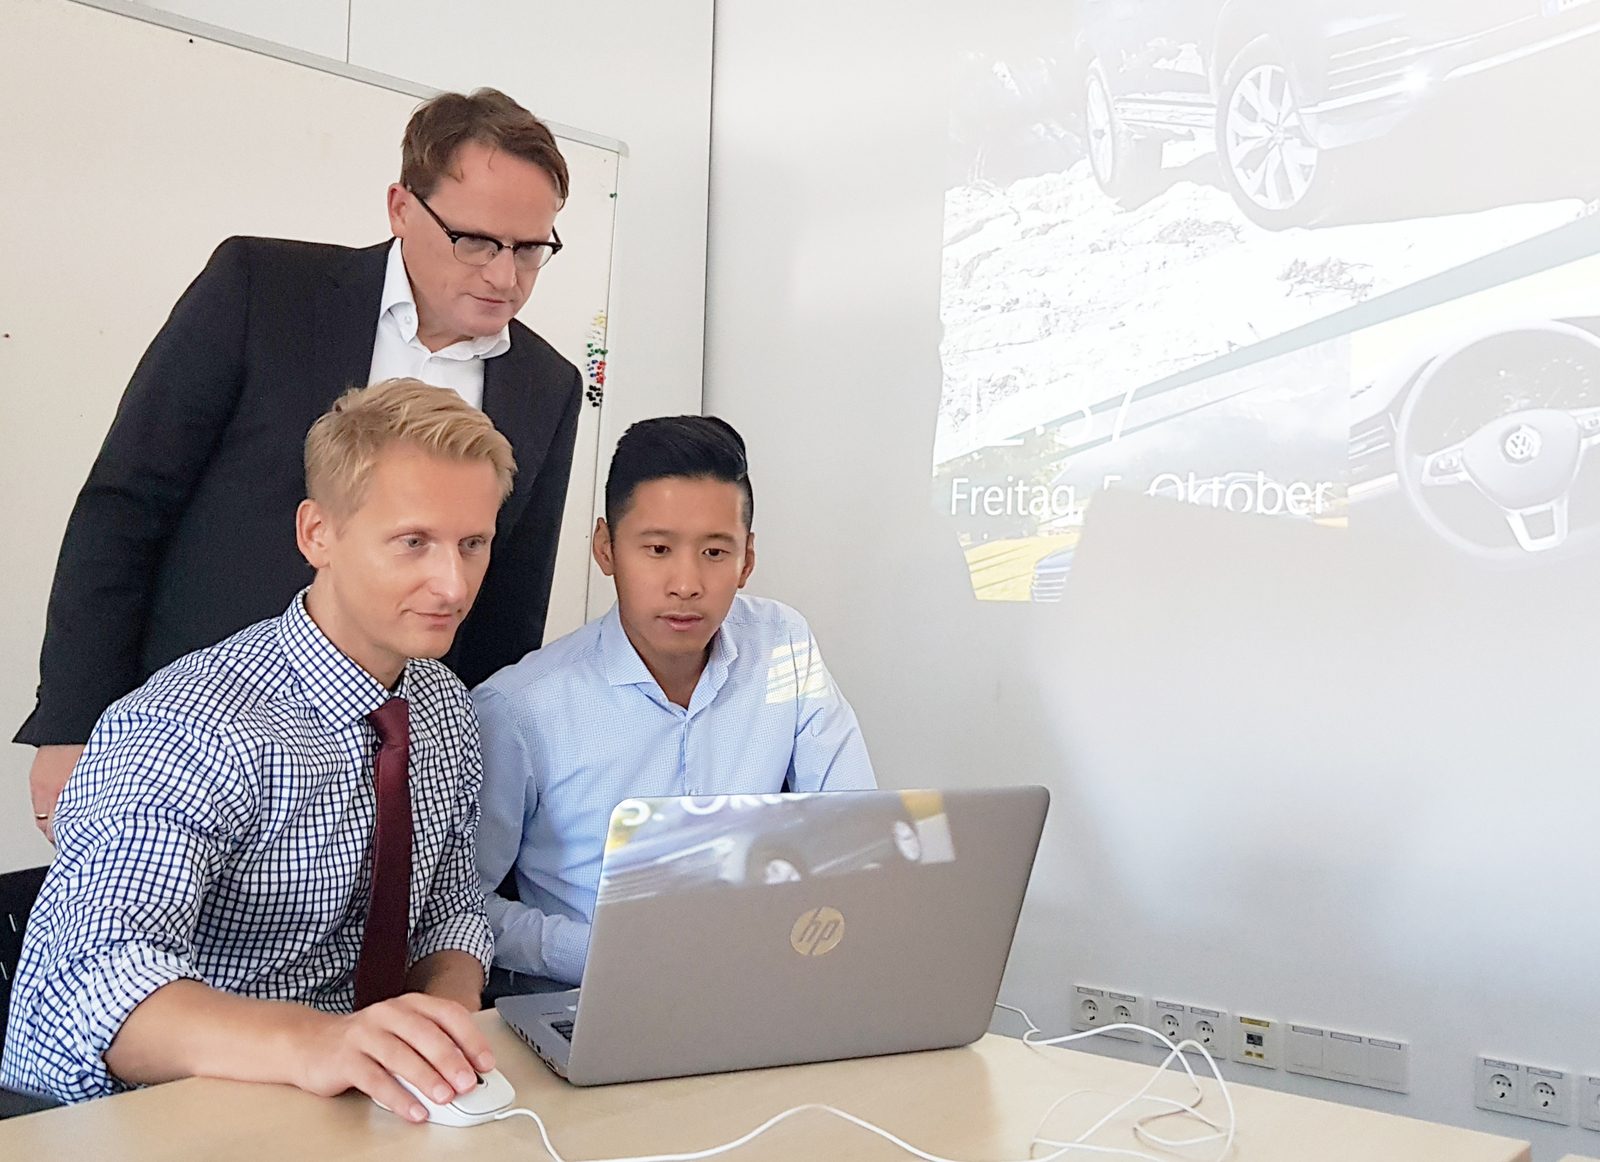 “Data makes exciting correlations visible on the screen and thus brings them to life”, says Prof. Dr. Mathias Bärtl from the University of Applied Sciences Offenburg (left)